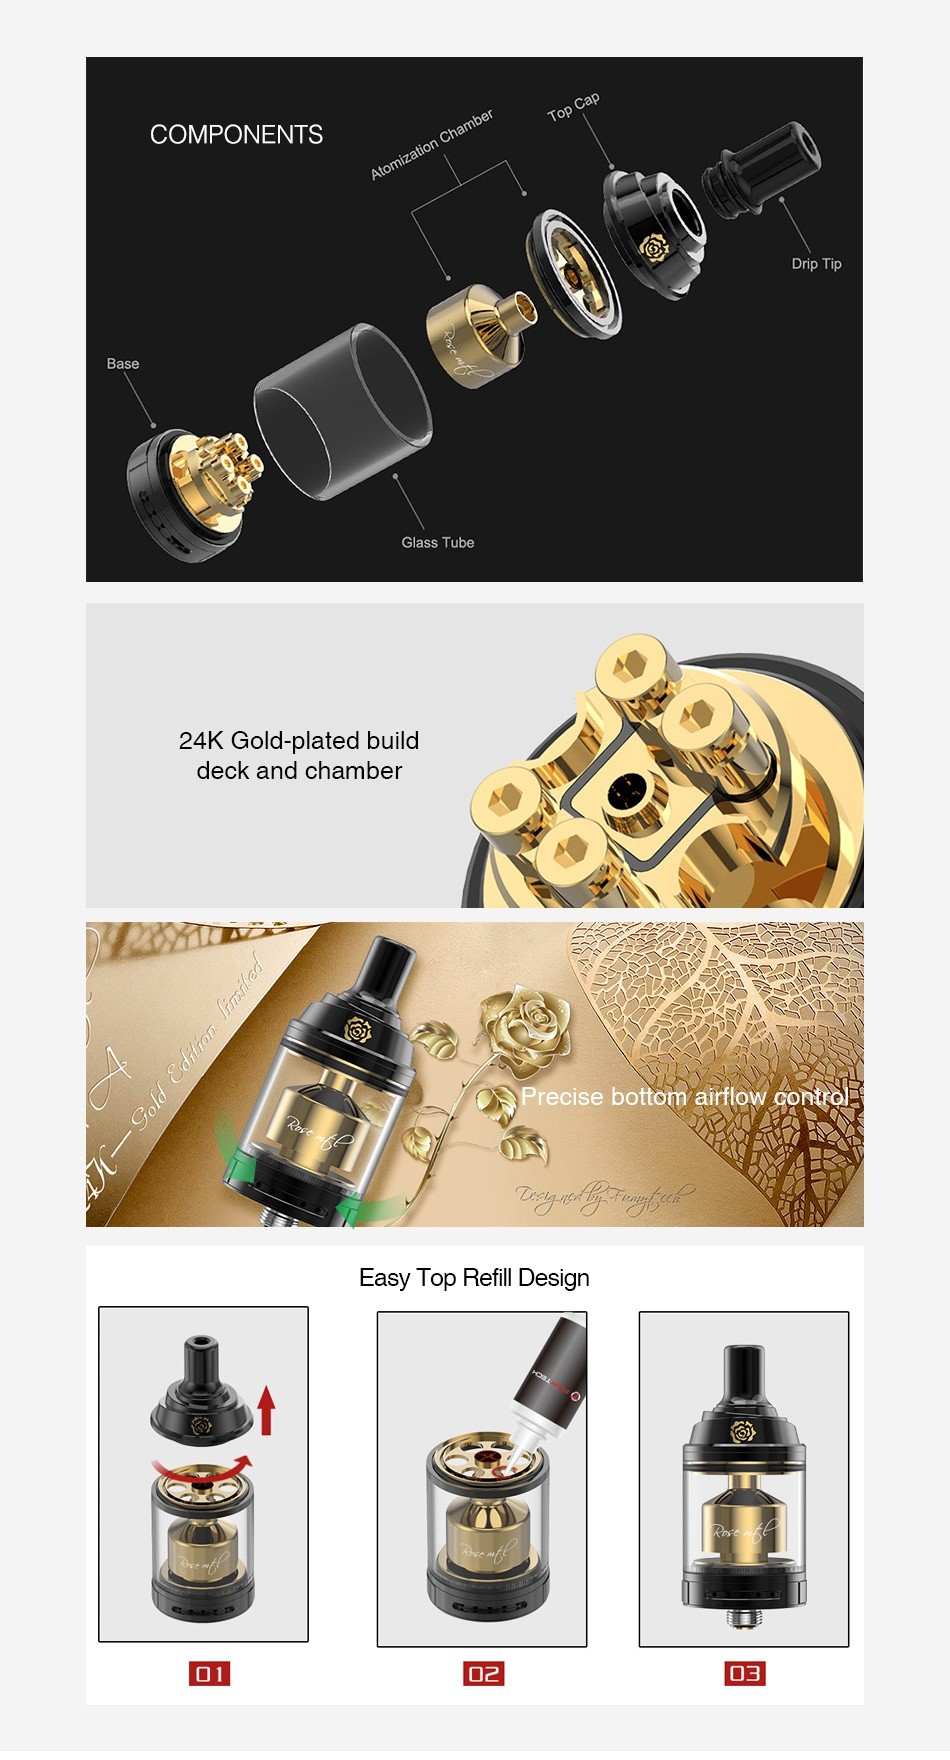 Fumytech Rose MTL RTA Gold Edition 3.5ml COMPONENTS Base lass Tube 24K Gold plated build deck and chamber m   Precise bottom airflow contR Easy Top Refill Design